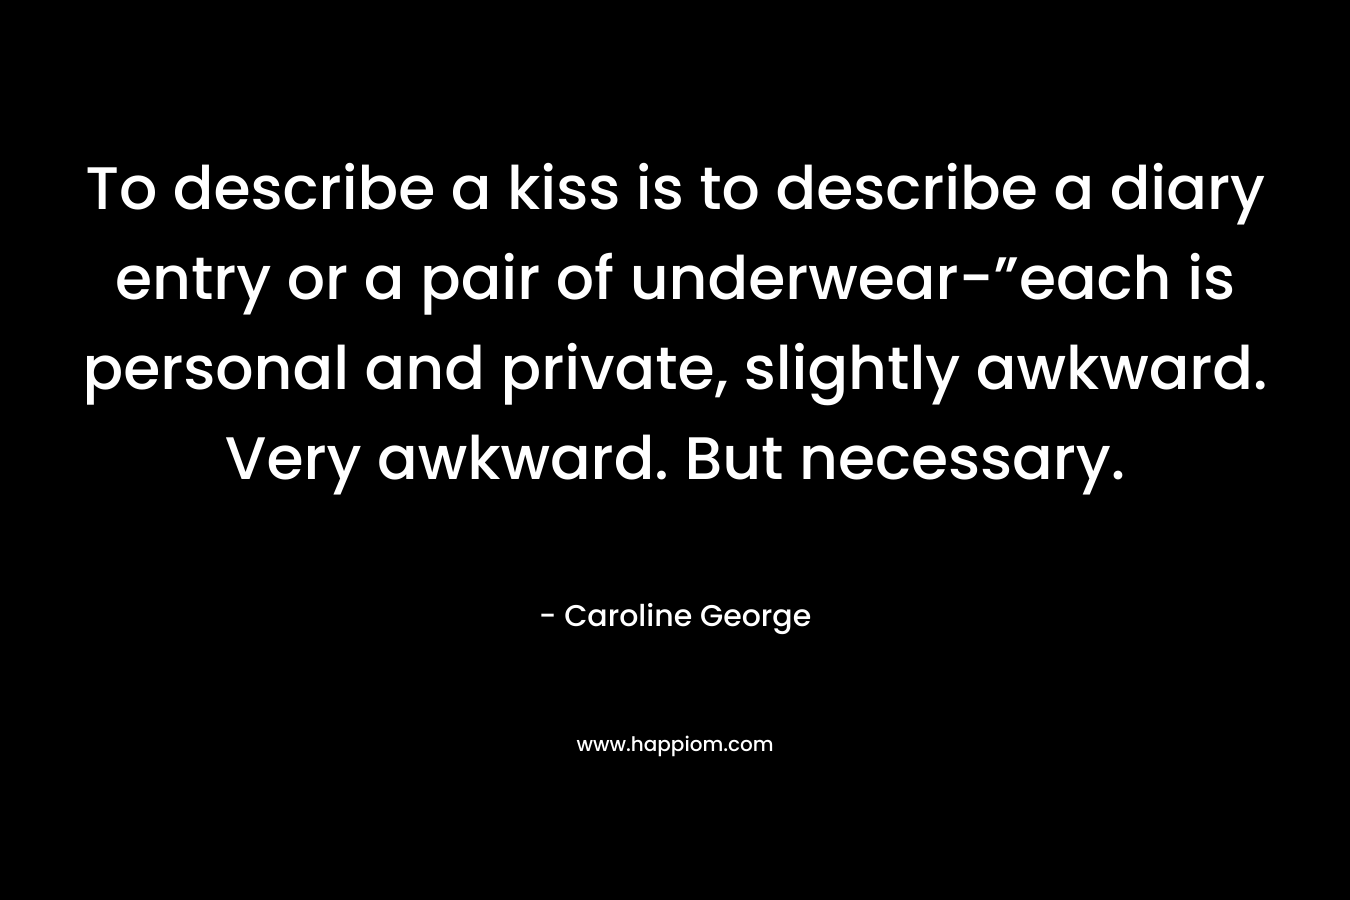 To describe a kiss is to describe a diary entry or a pair of underwear-”each is personal and private, slightly awkward. Very awkward. But necessary. – Caroline George